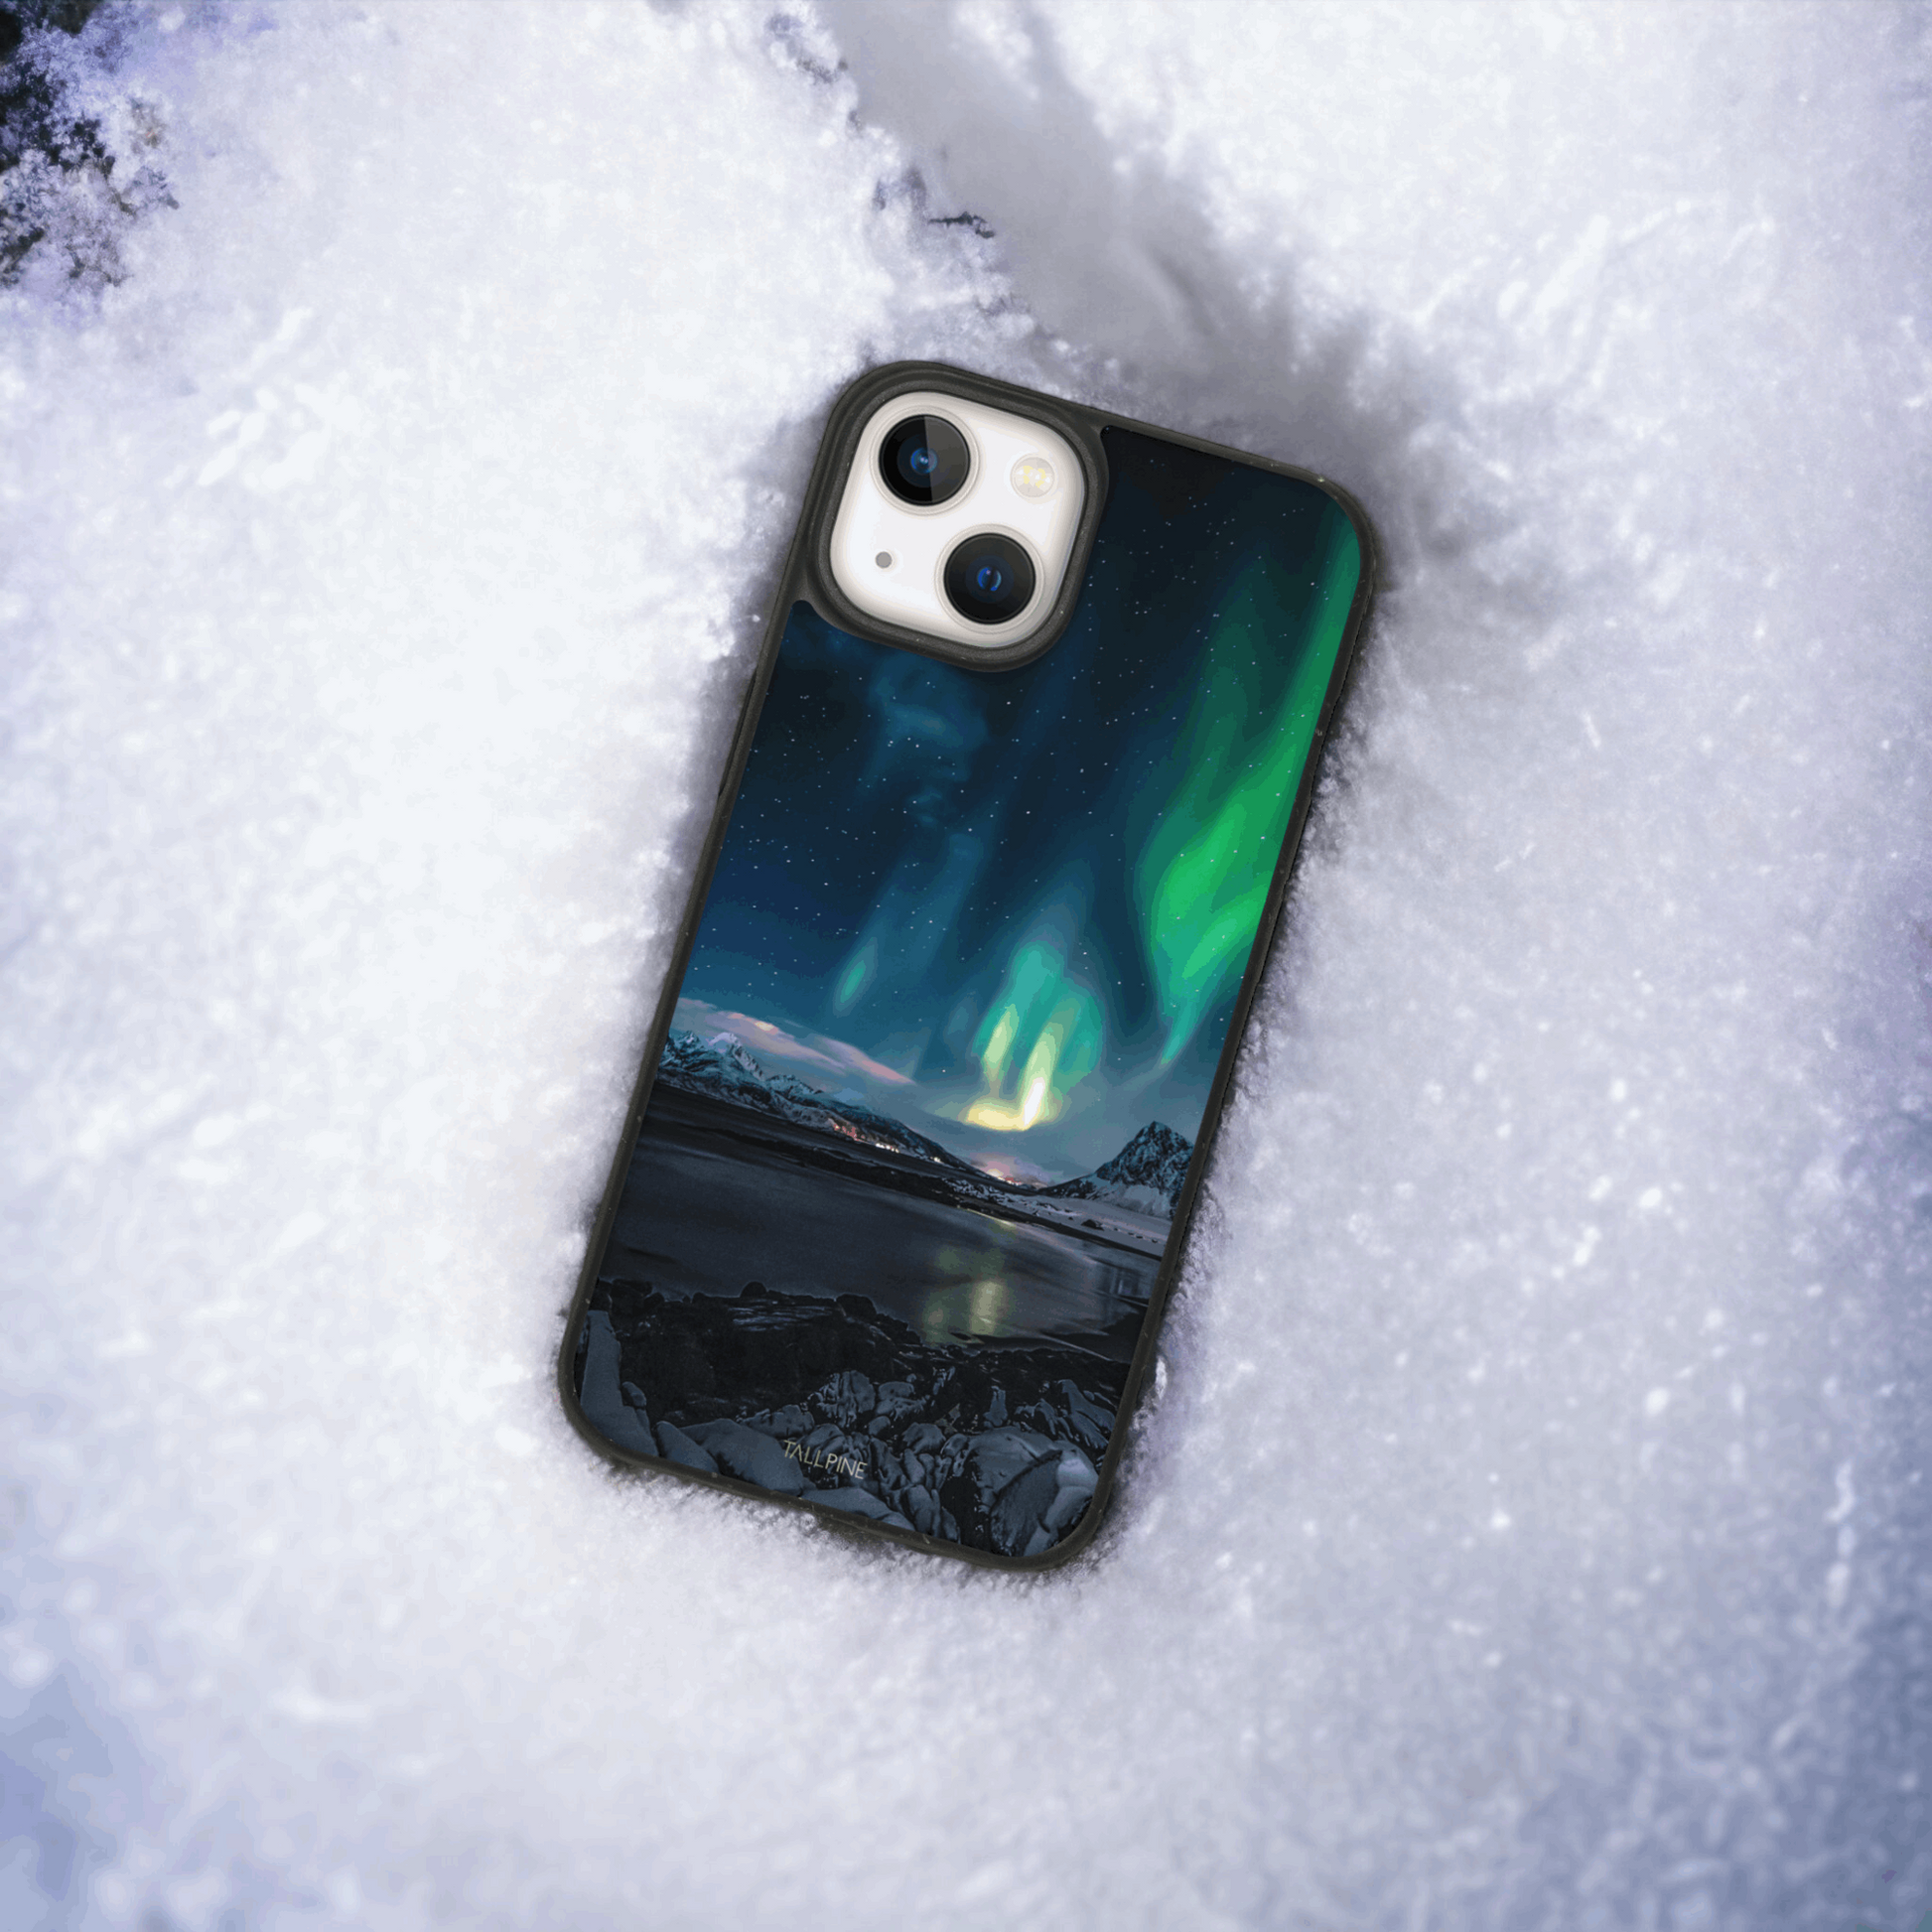 Northern Lights - Eco Case - Tallpine Cases | Sustainable and Eco-Friendly - Black Green Nature